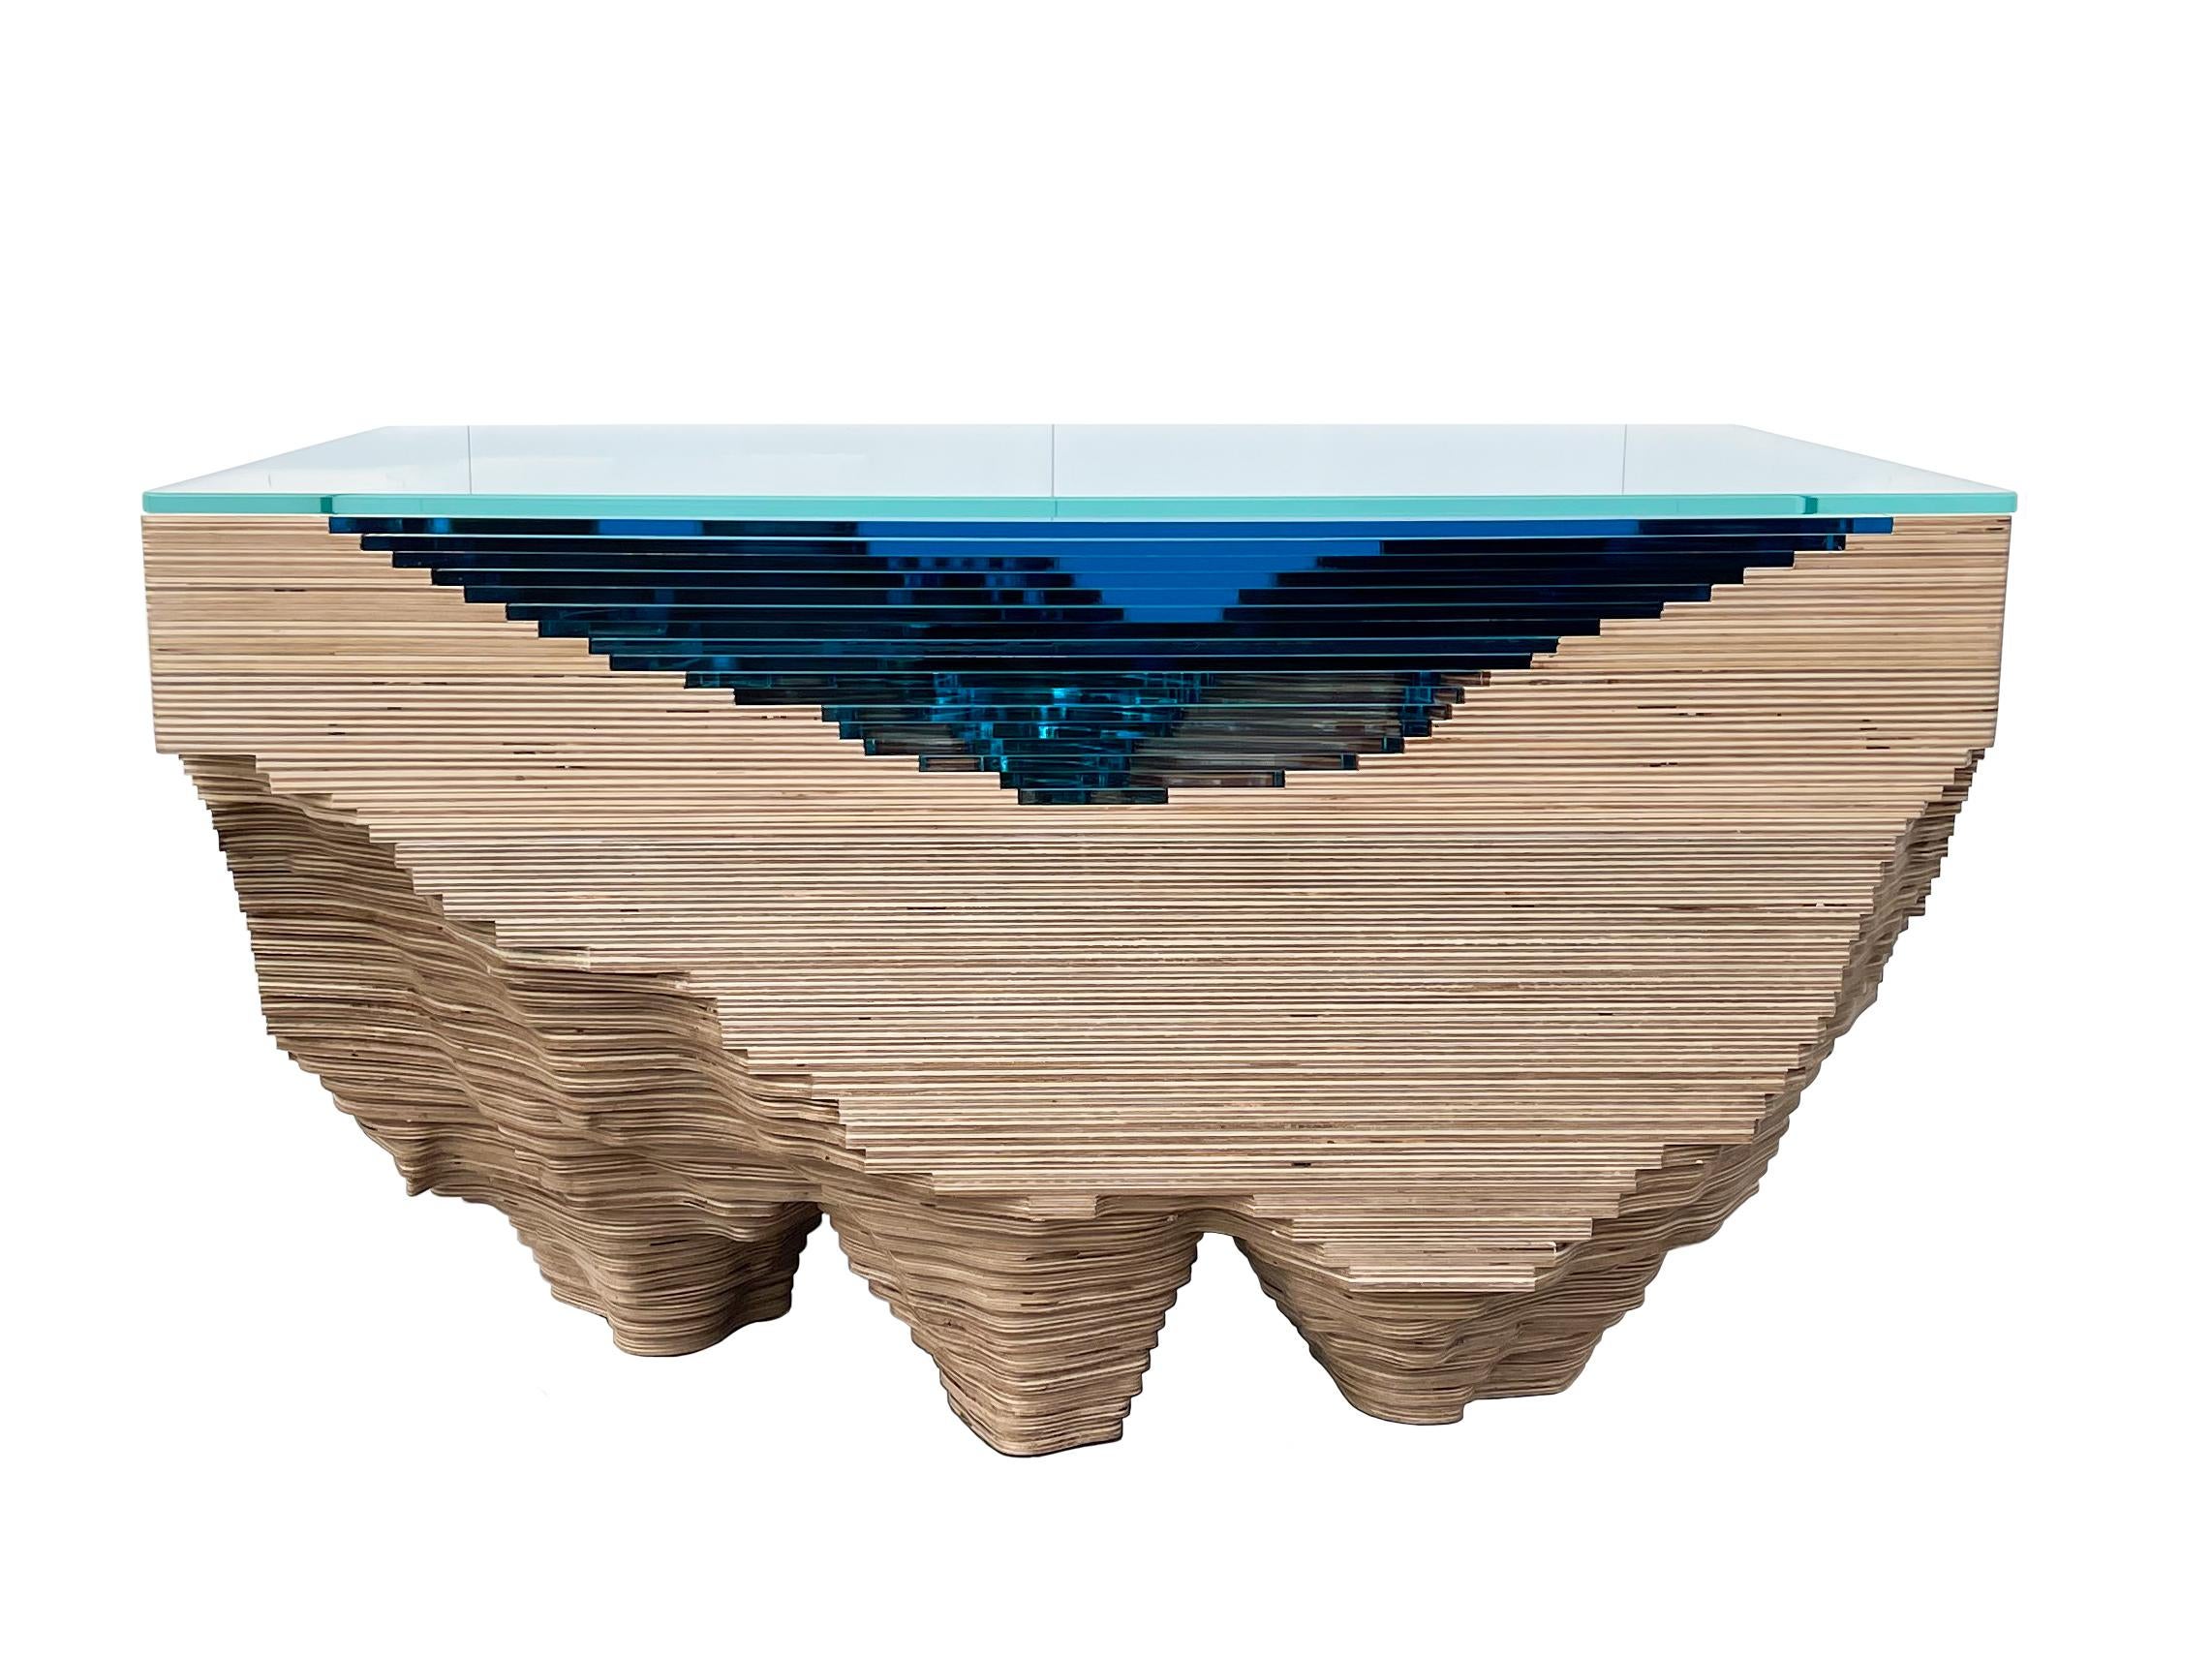 A bespoke rectangular edition Abyss coffee table by Christopher Duffy for Duffy London. This is a one-off, artists-proof edition piece and the only coffee table available in this size.

Like all of Duffy's Abyss designs, the intricate layering of